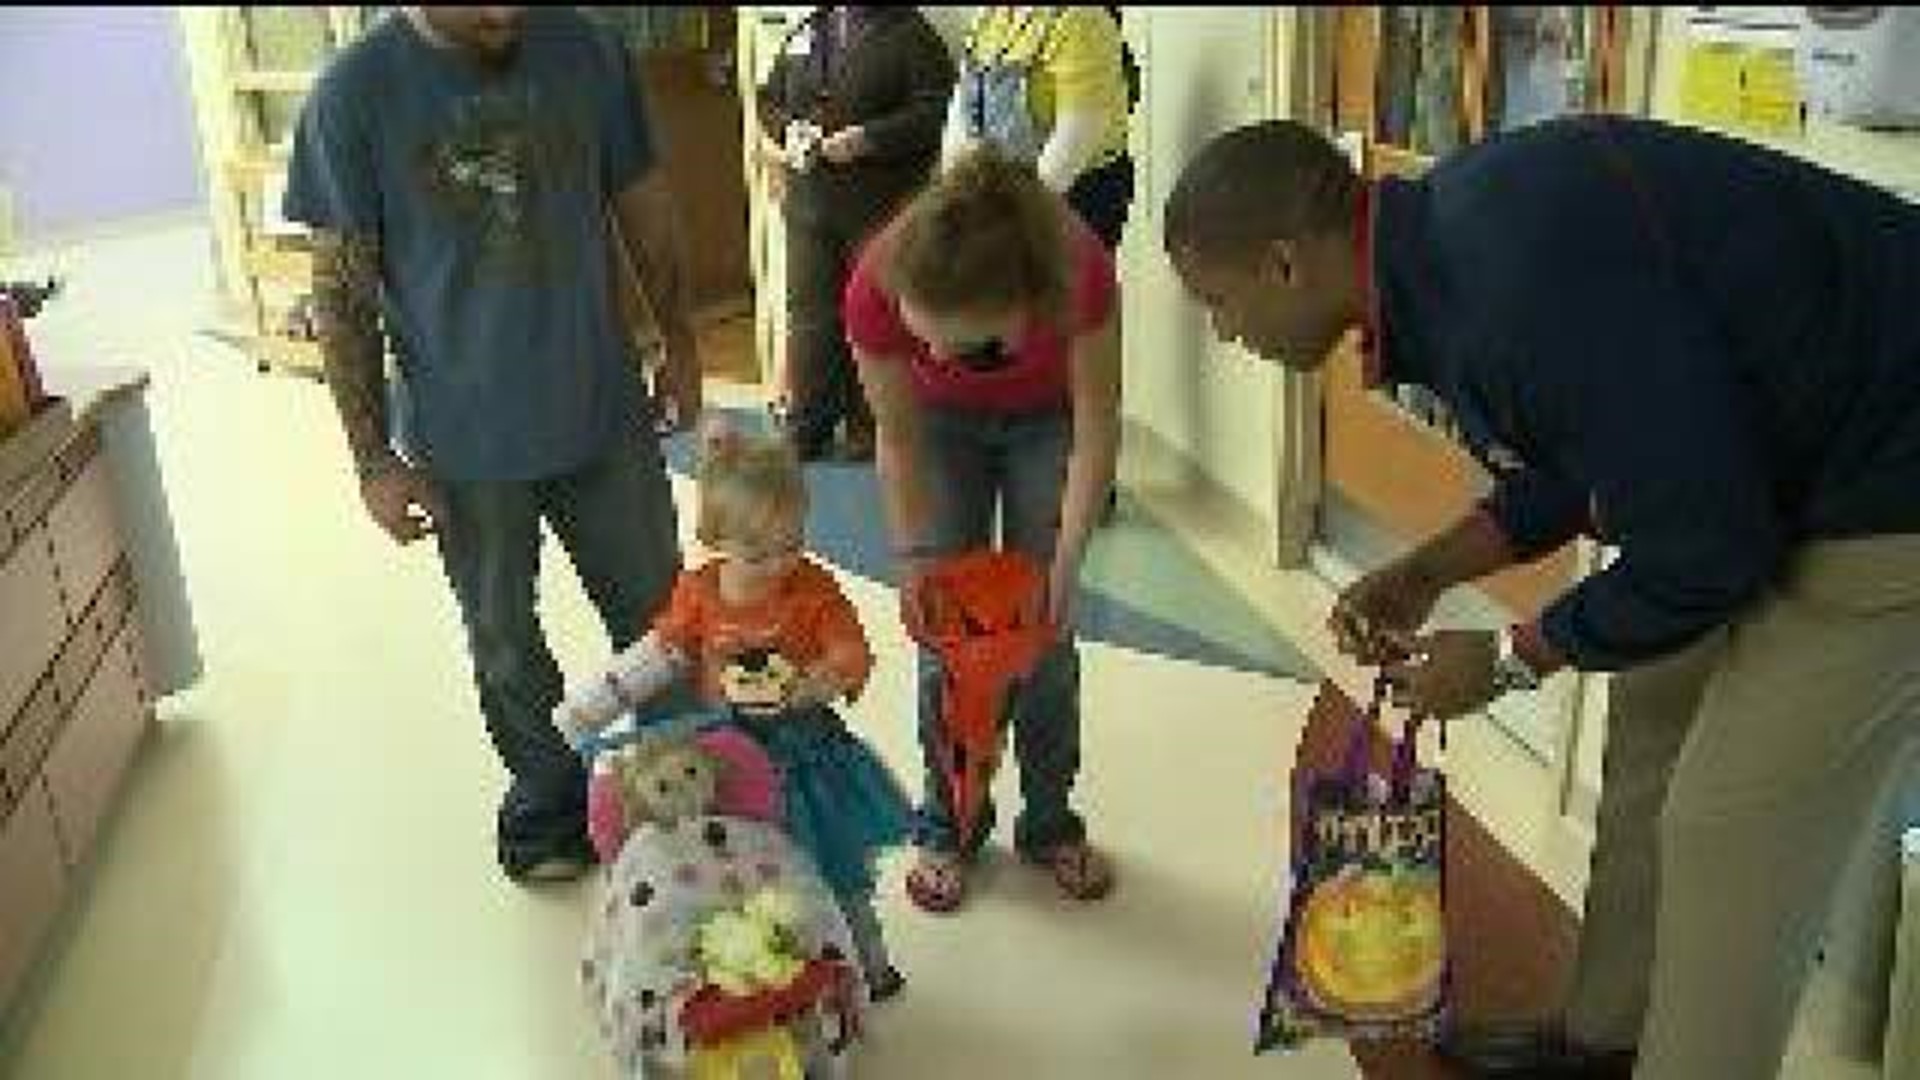 Patients Trick or Treat at Children’s Hospital